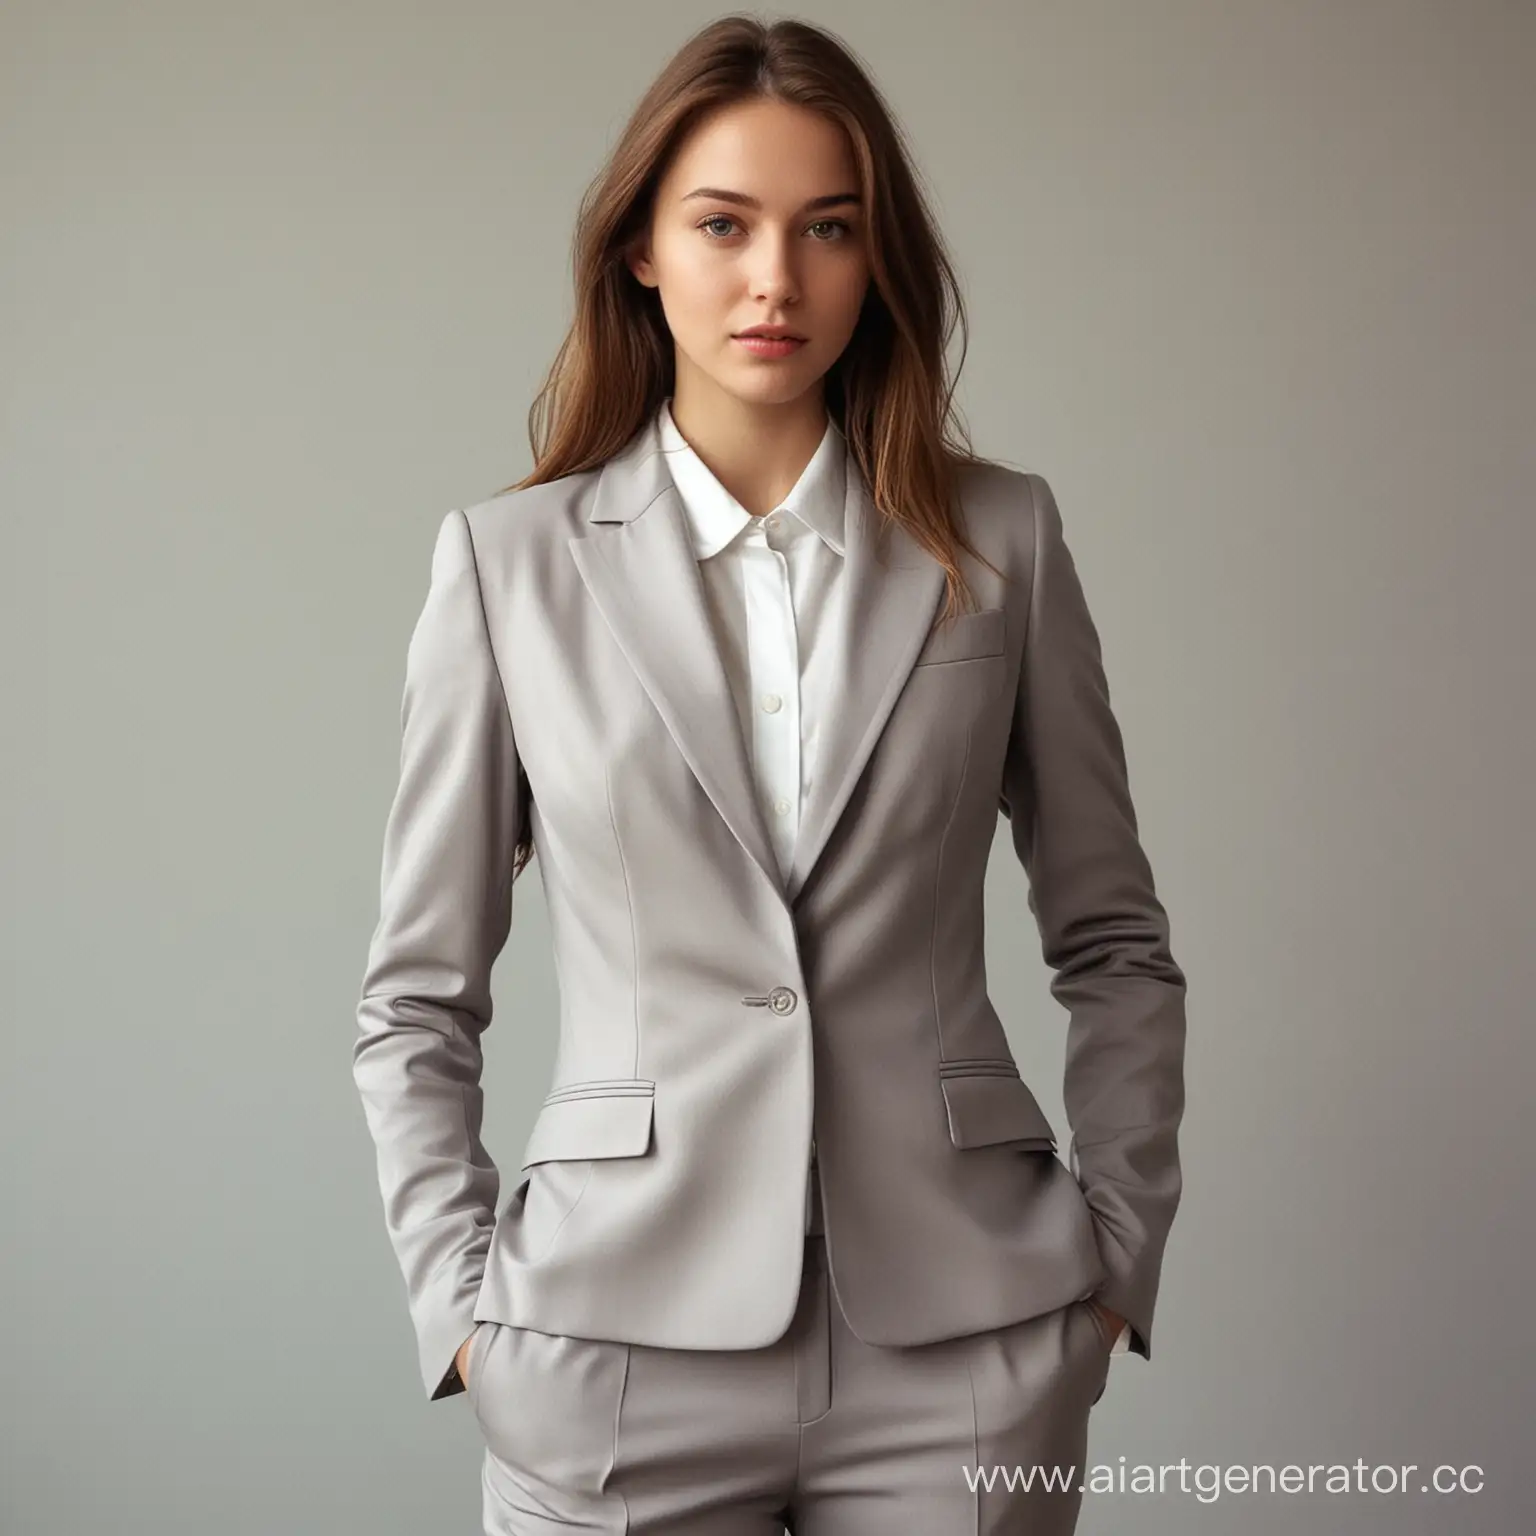 The girl in the suit
